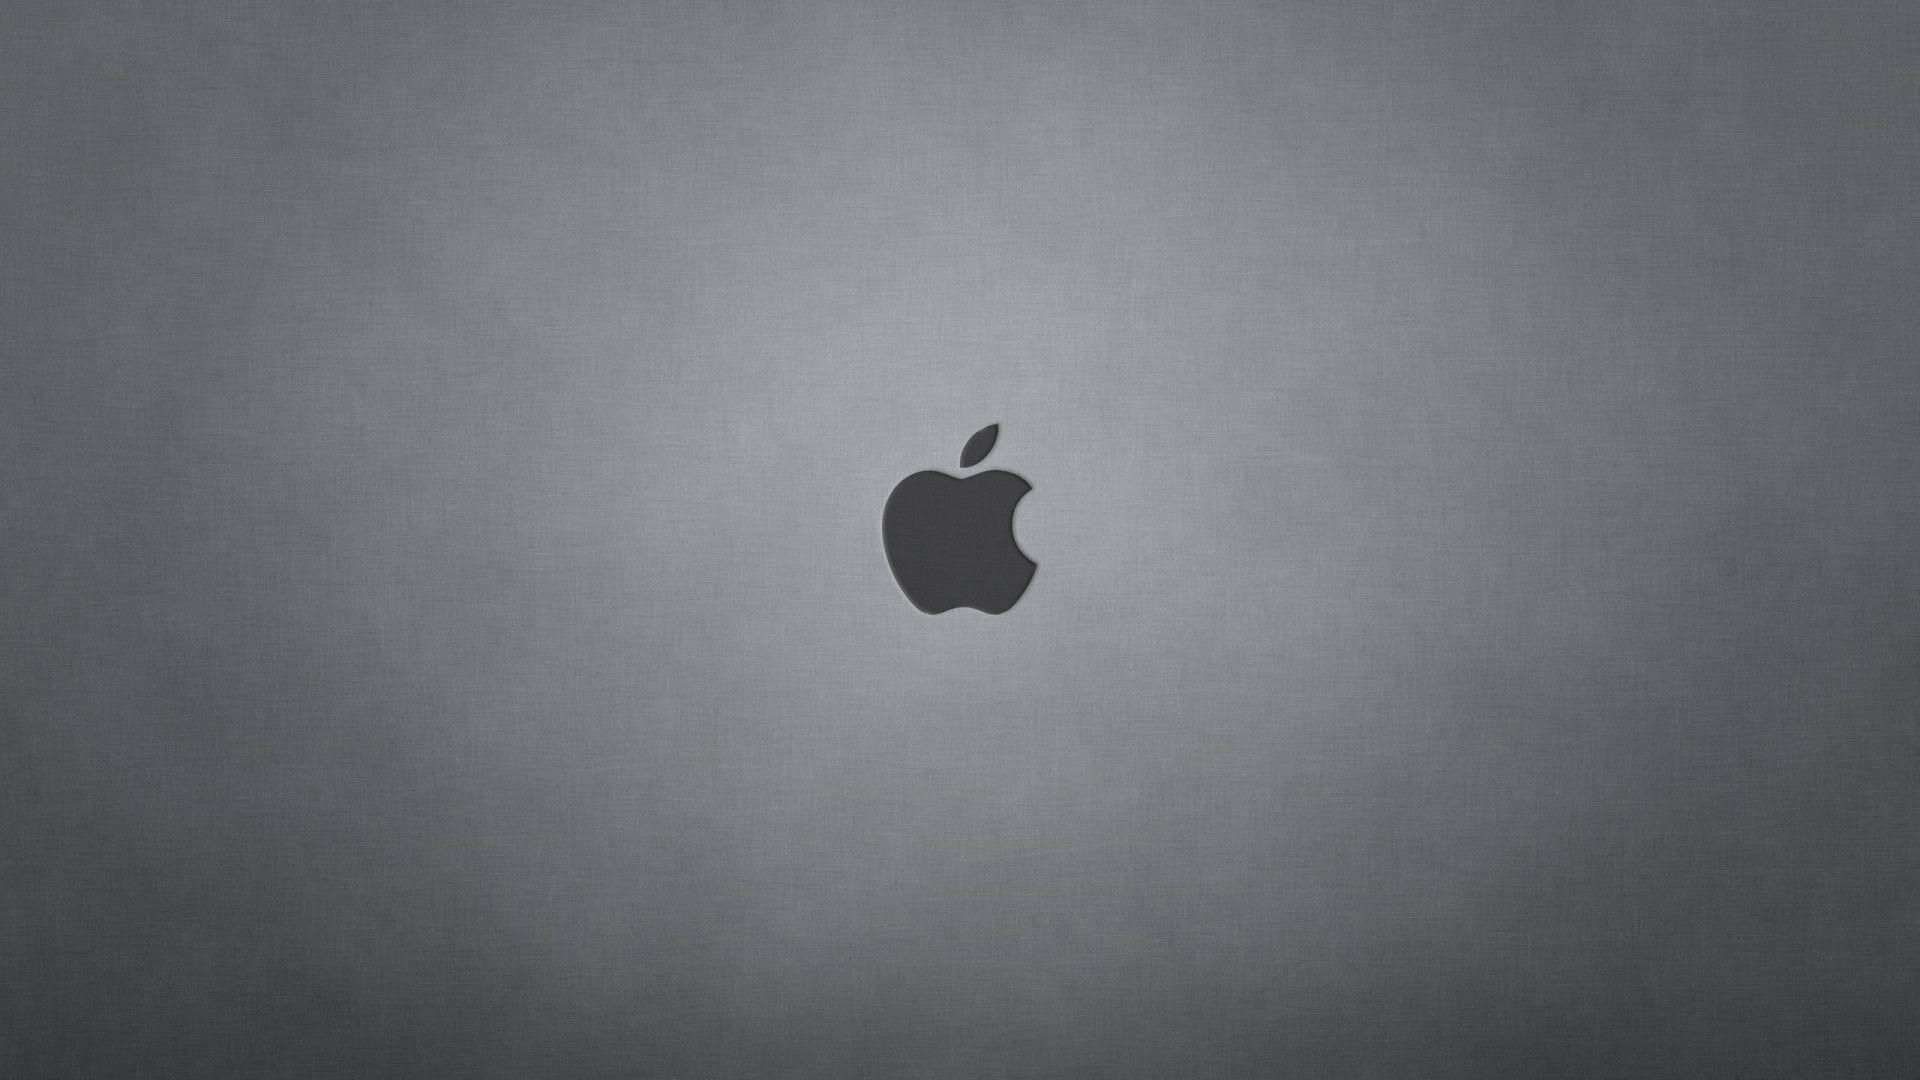 Well Dressed Mac Os Lion Press HD Apple Wallpaper For 1920x1080PX